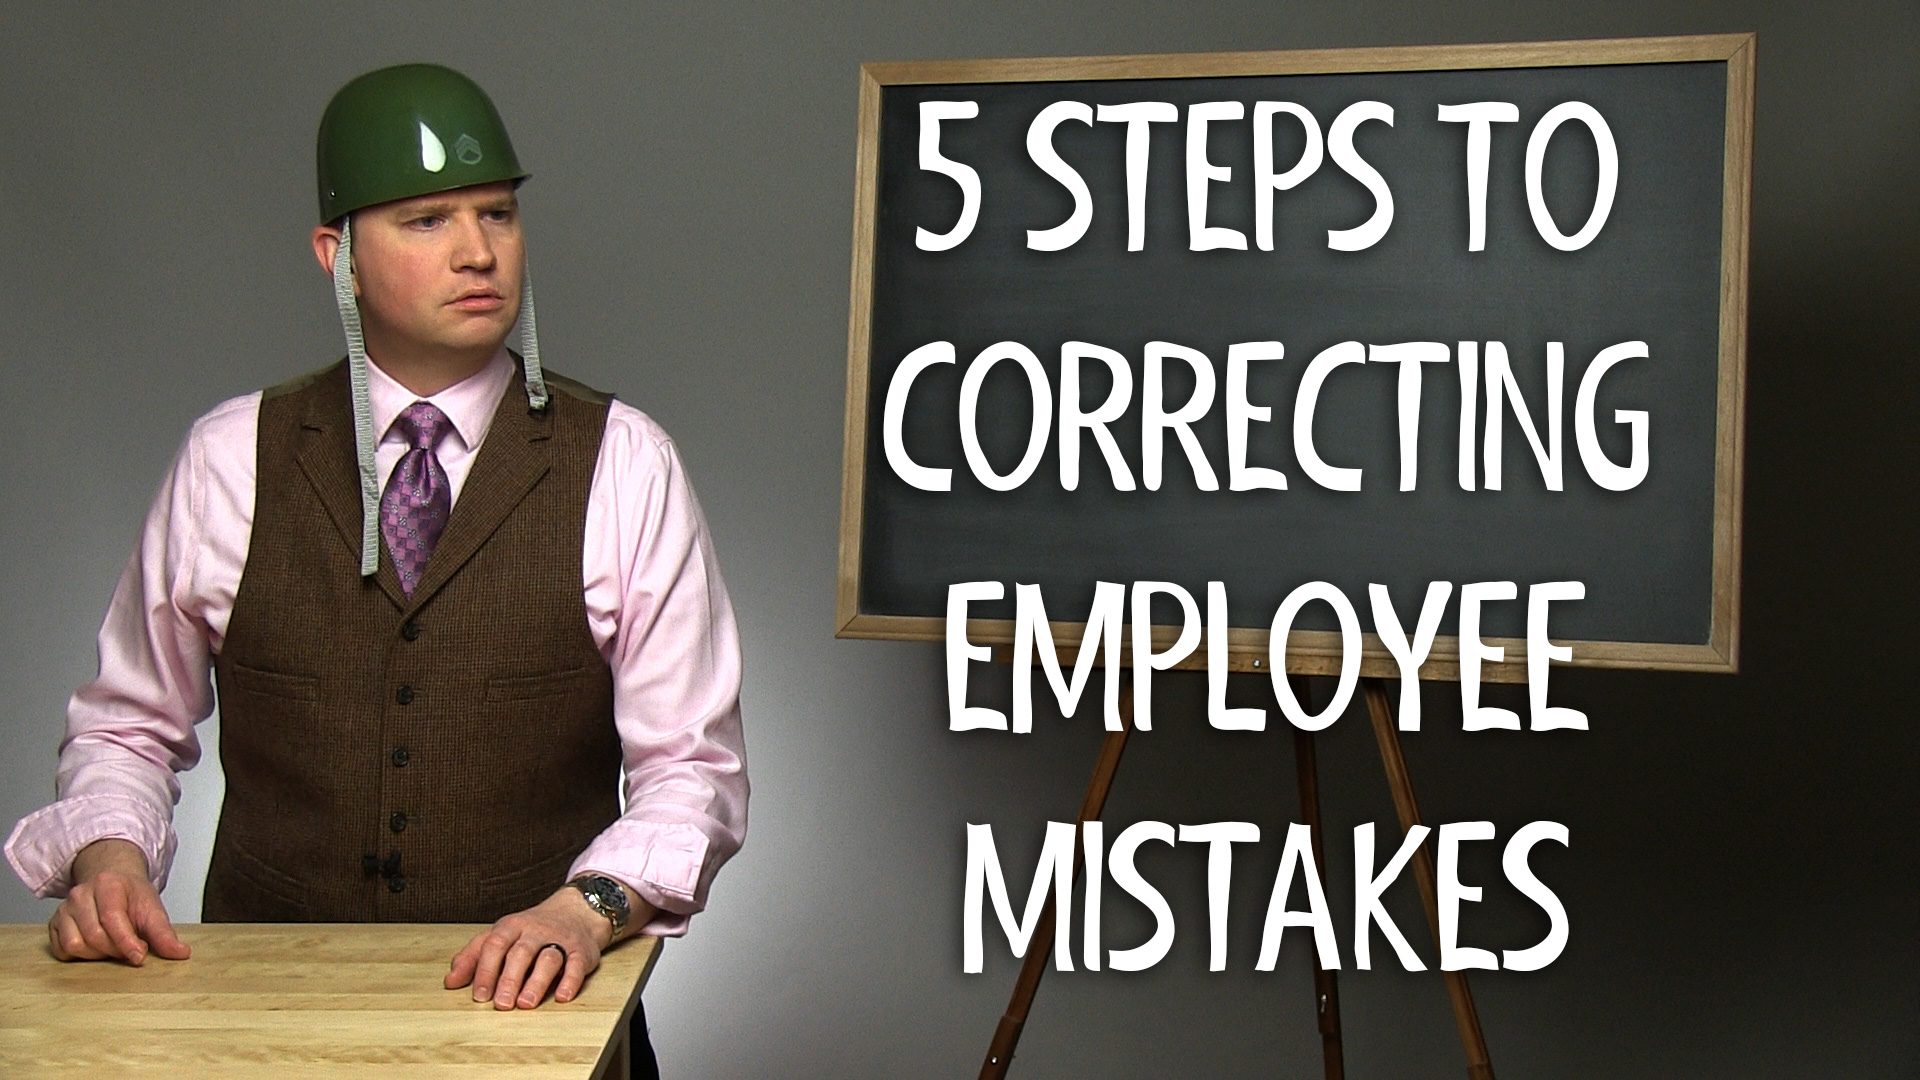 5 Steps to Correcting Employee Mistakes